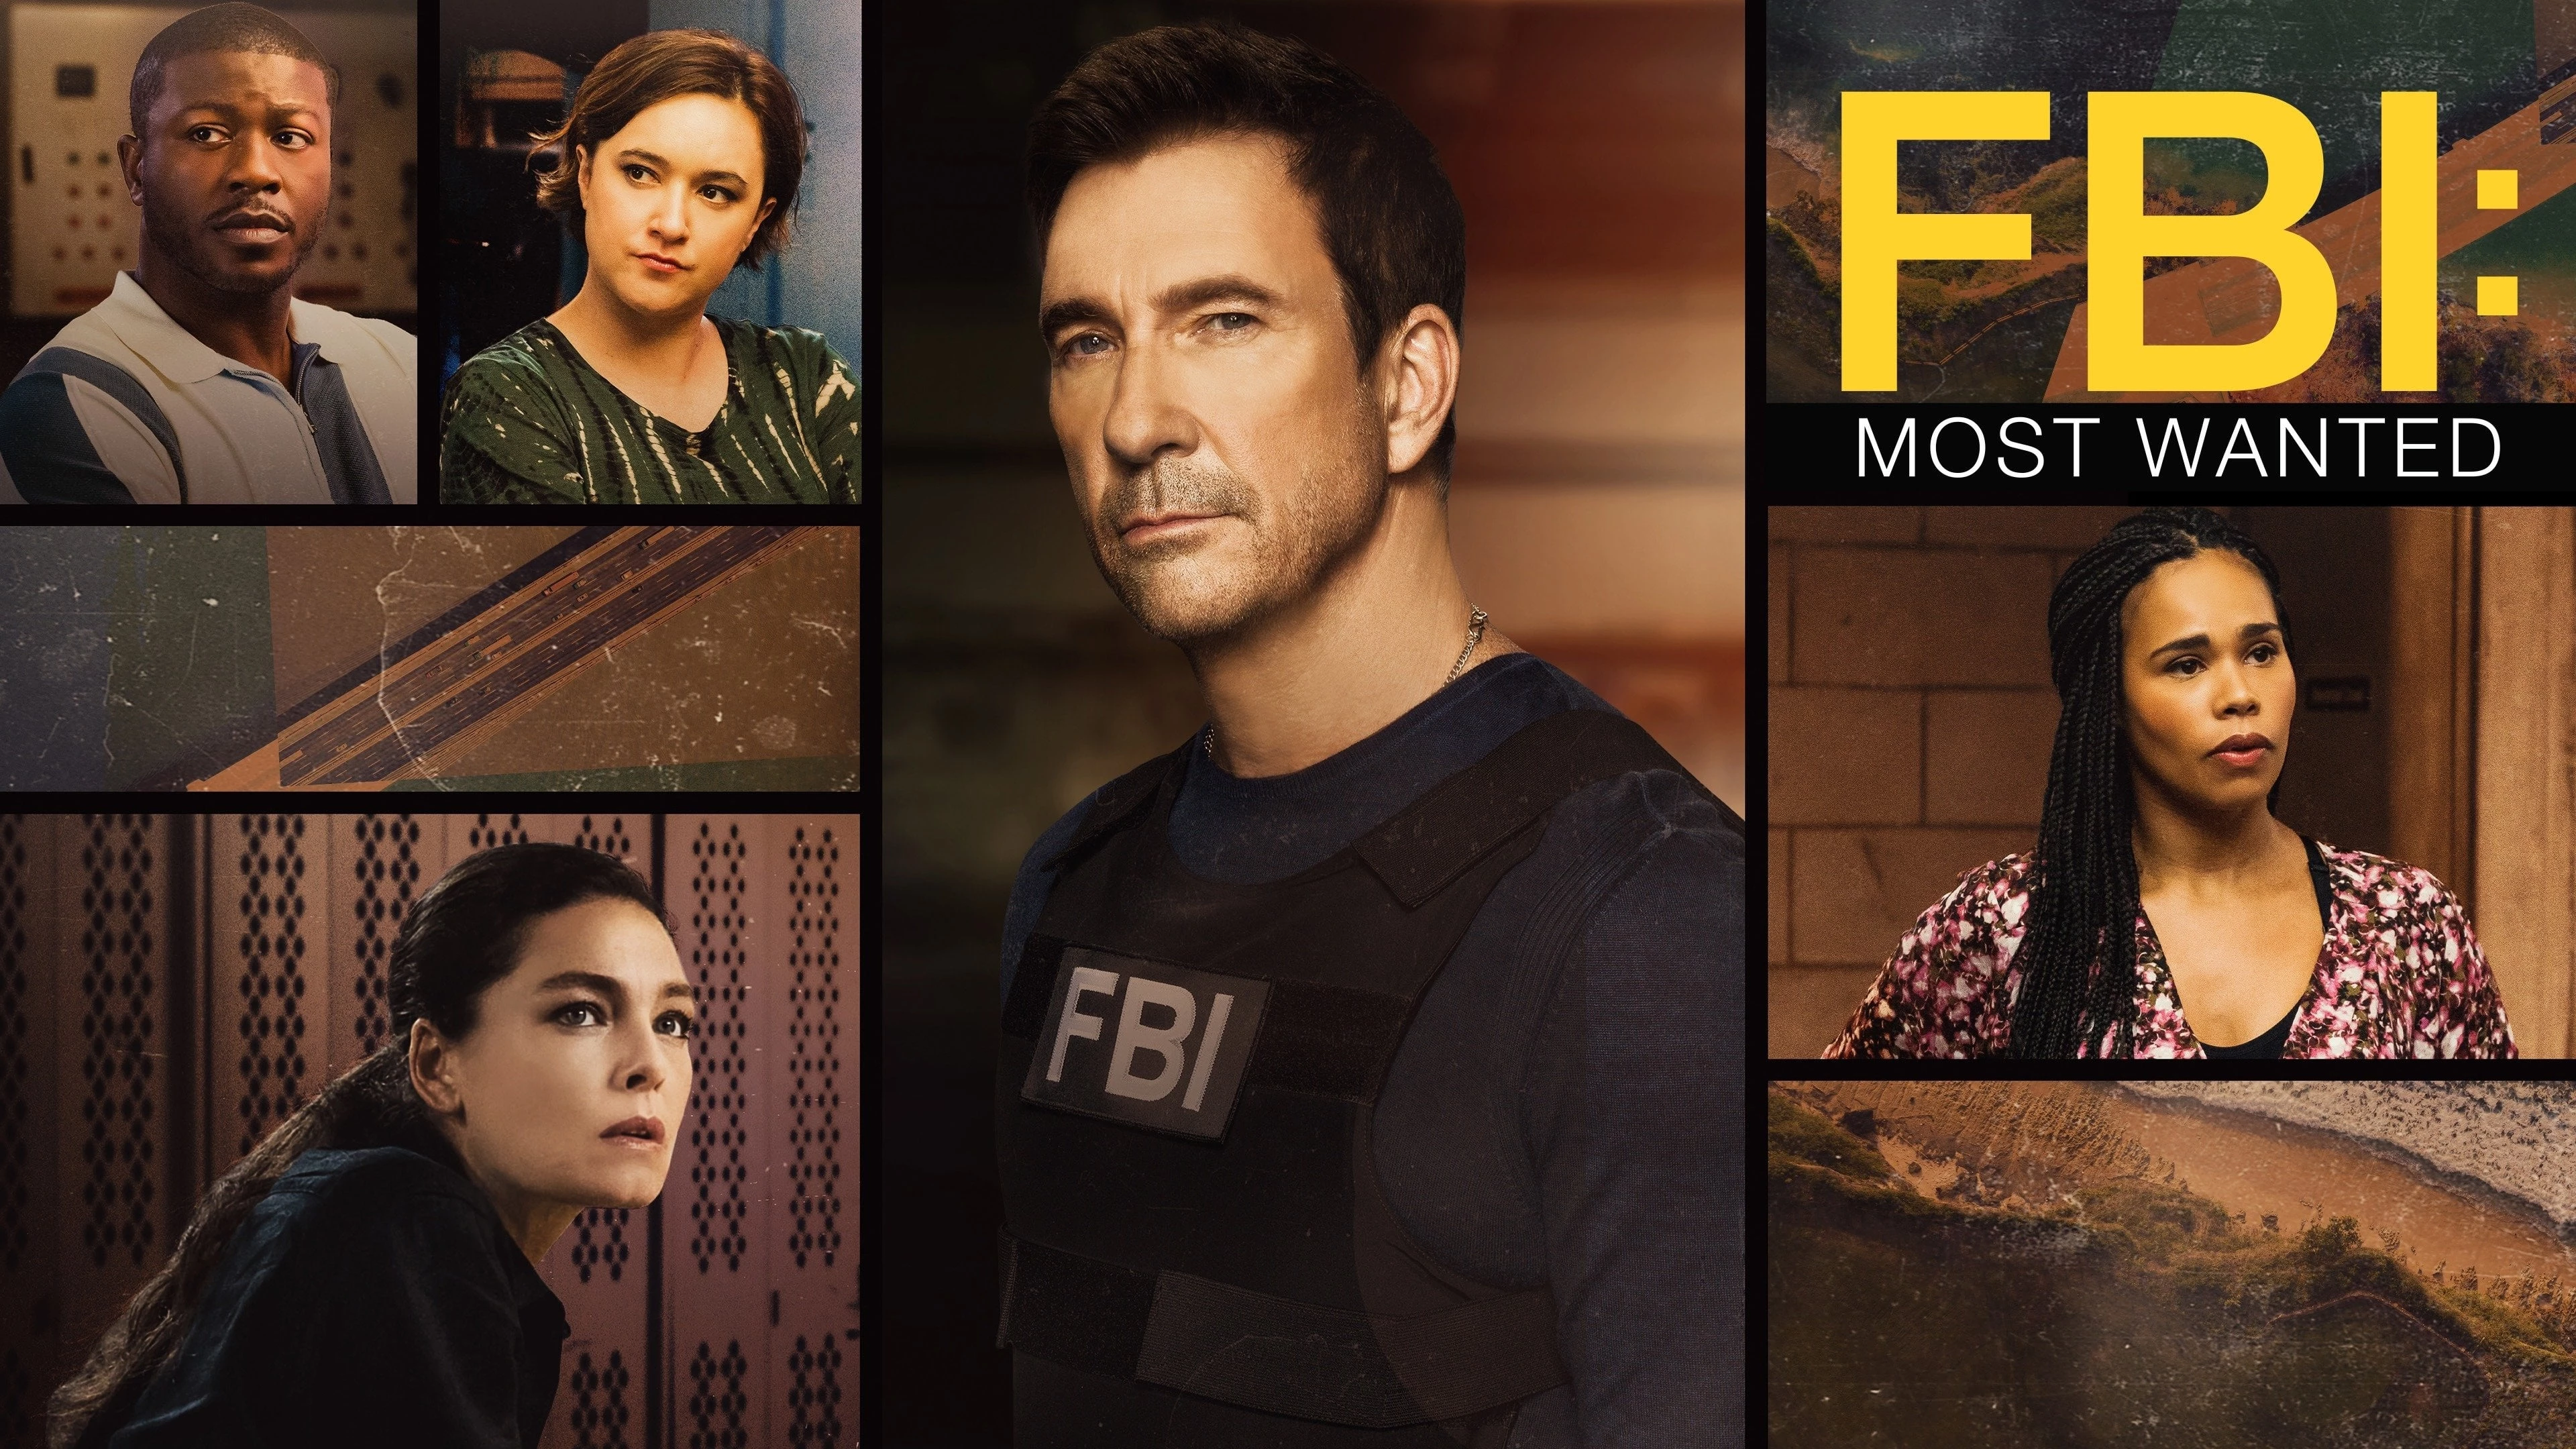 What Is "FBI: Most Wanted" TV Show?